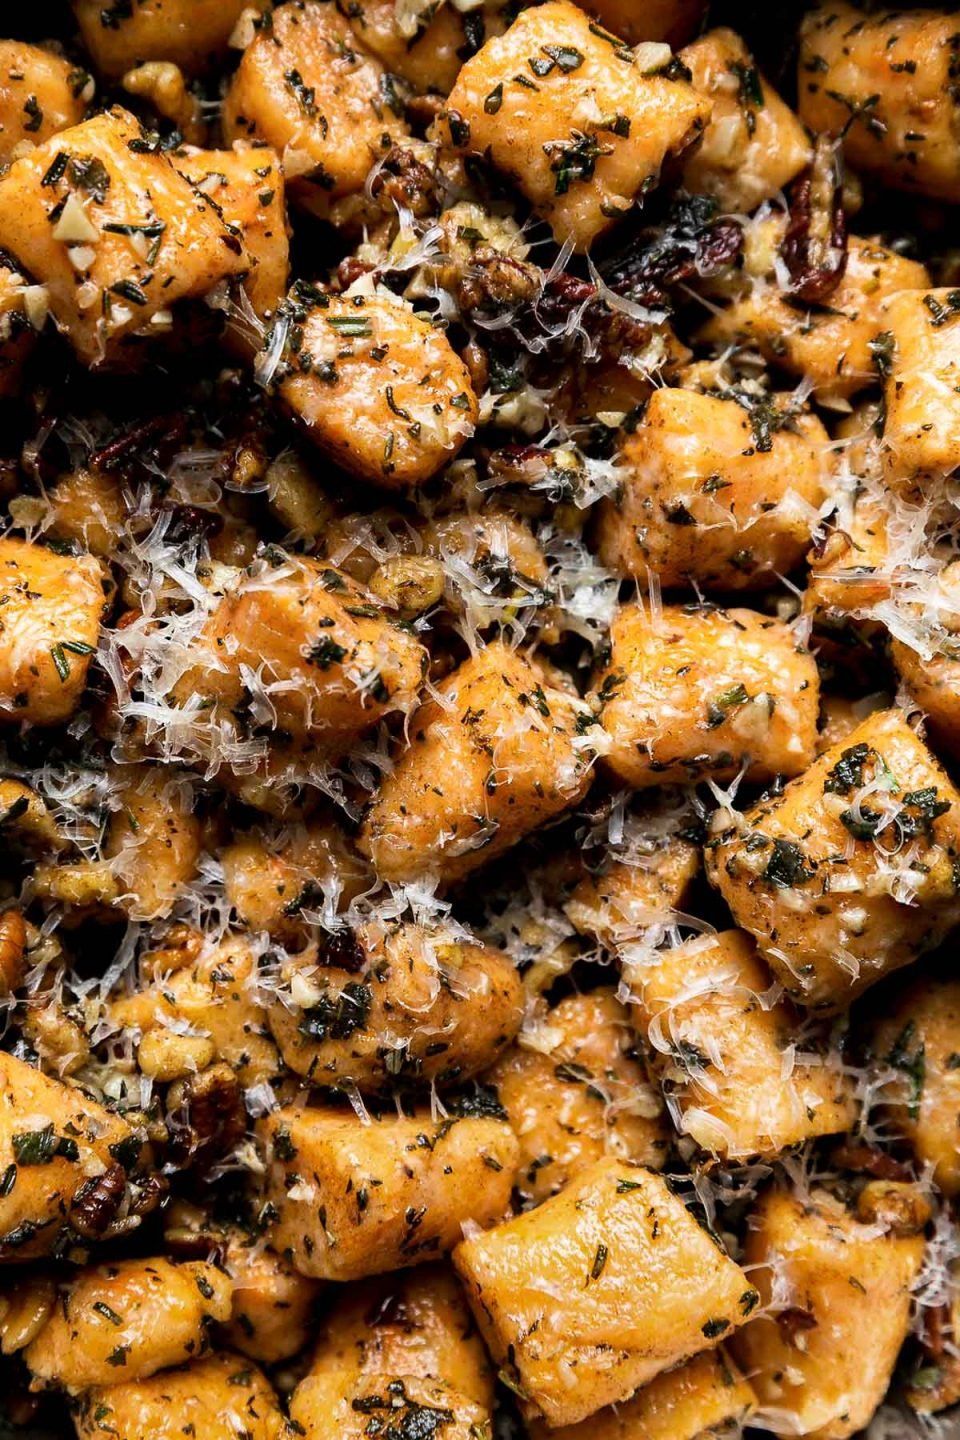 A close up of Sweet Potato Gnocchi with Garlic Herb Brown Butter sauce that has been garnished with freshly grated parmesan.